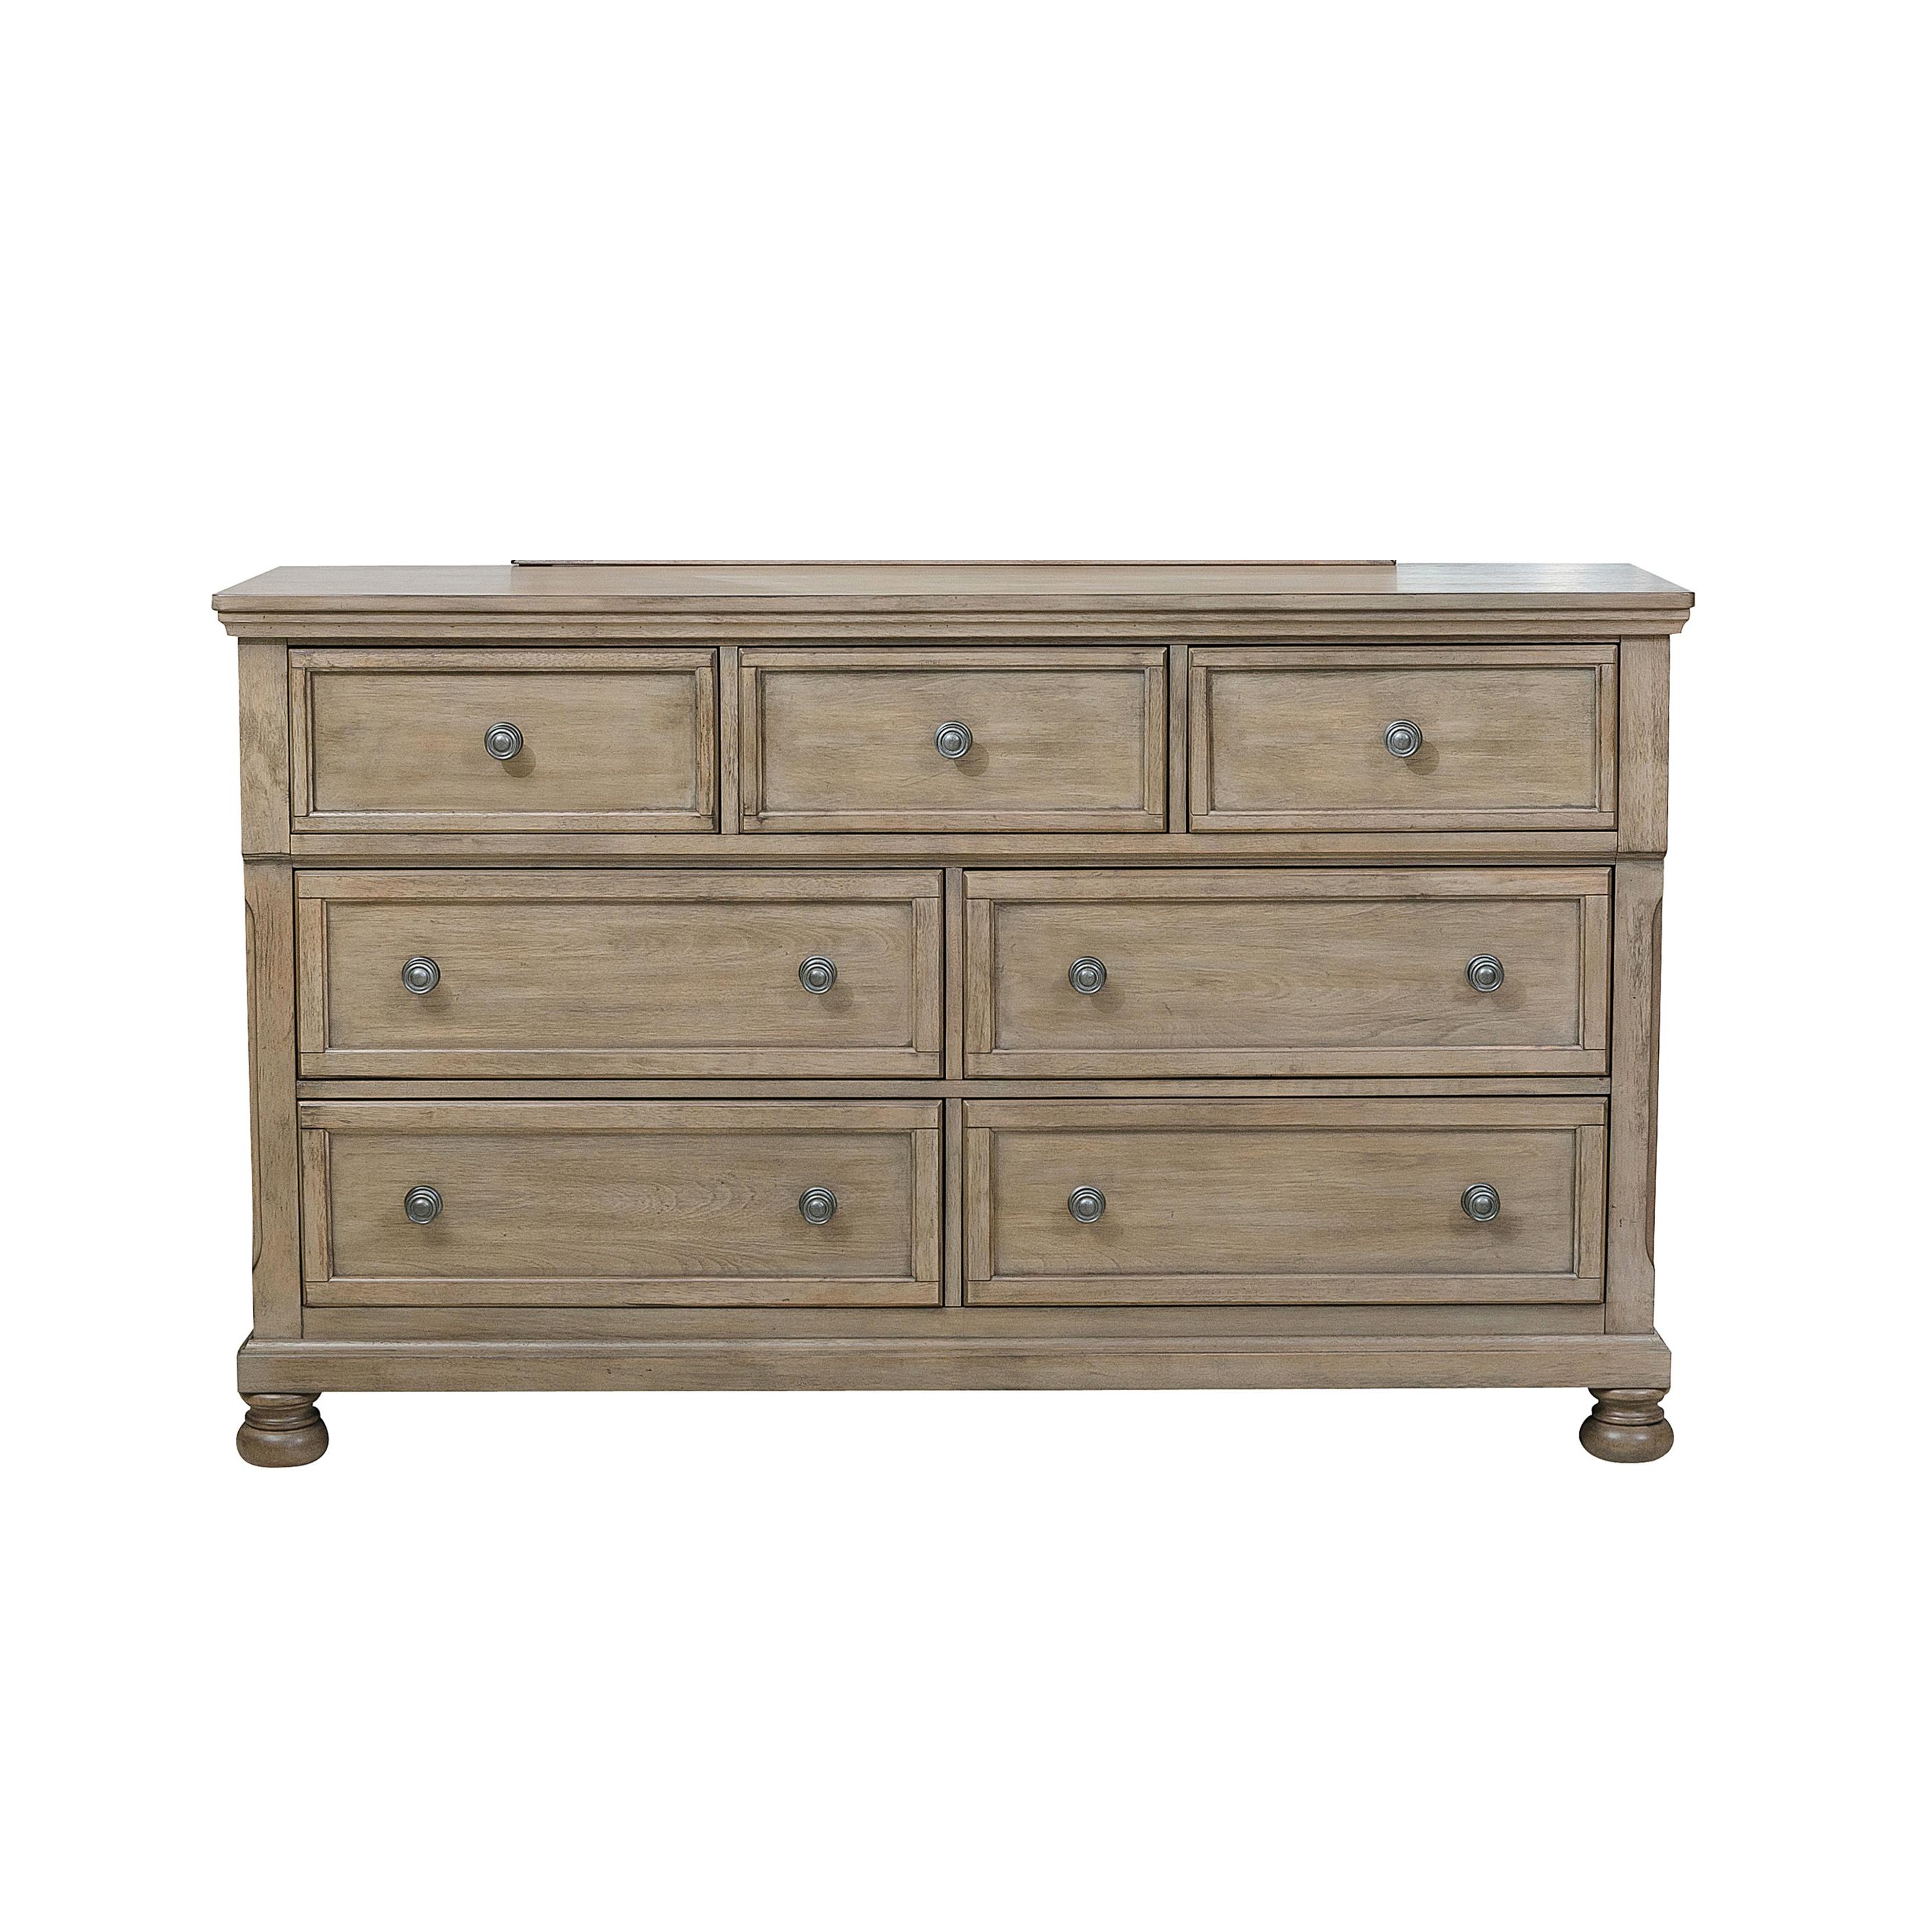 Transitional Dresser 2259GY-5 Bethel 2259GY-5 in Gray 